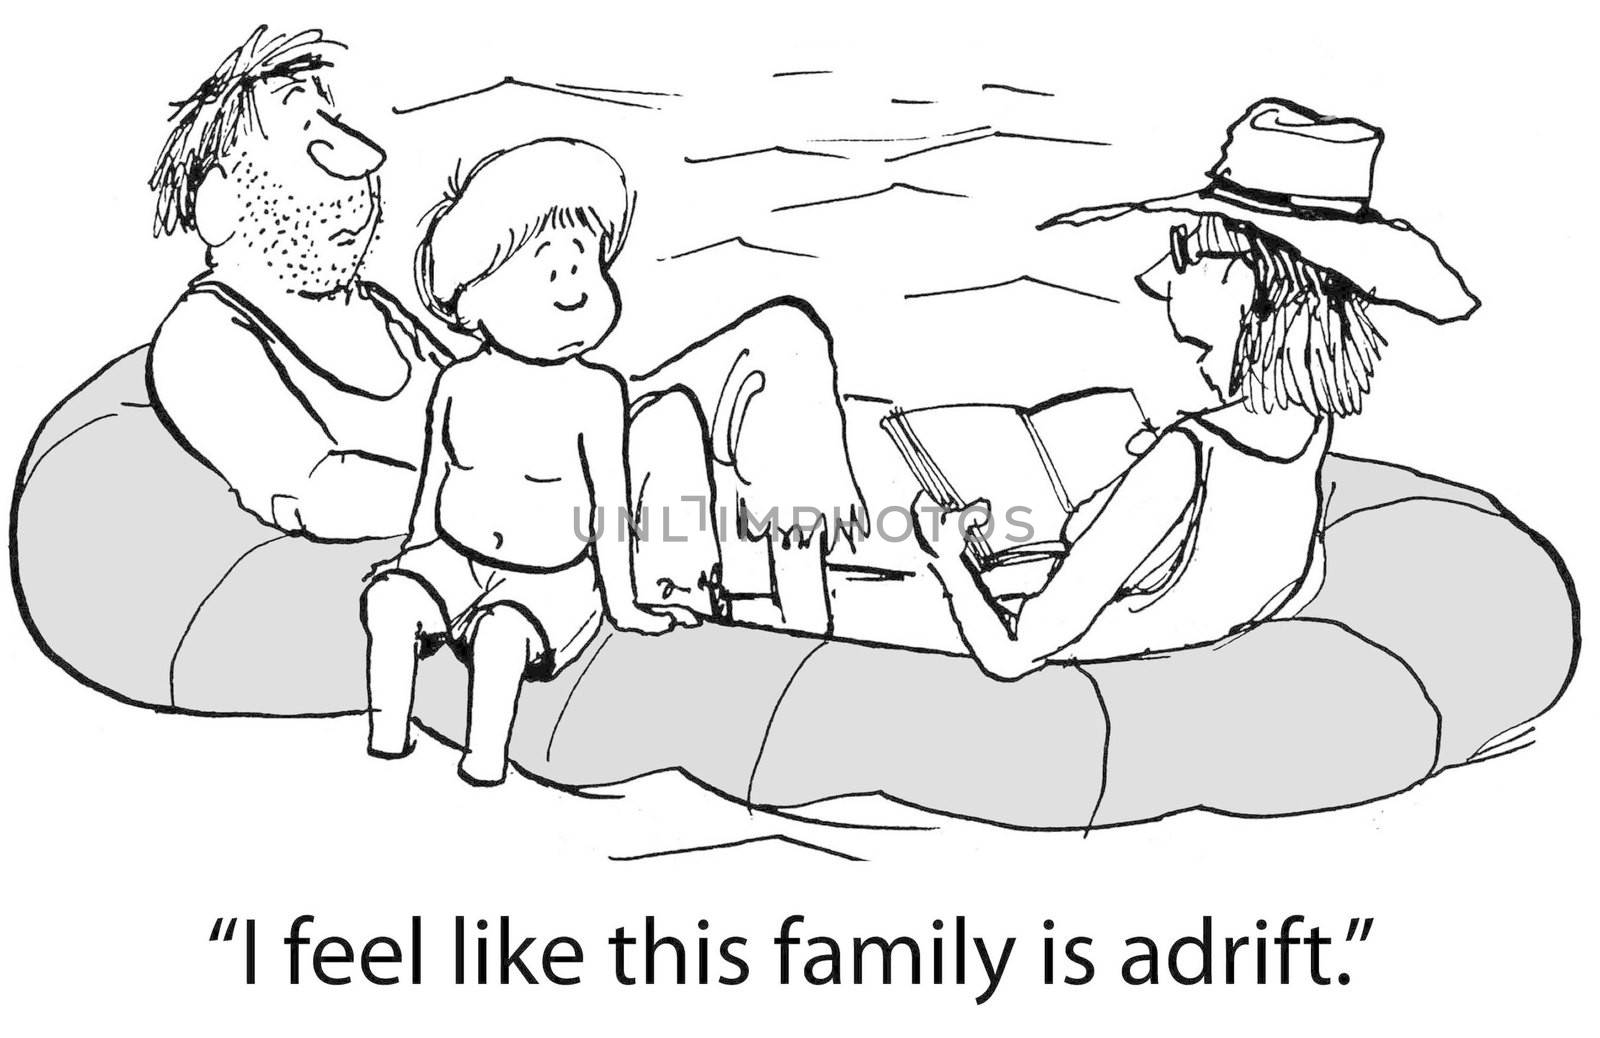 Family tries to stay passive while adrift by andrewgenn